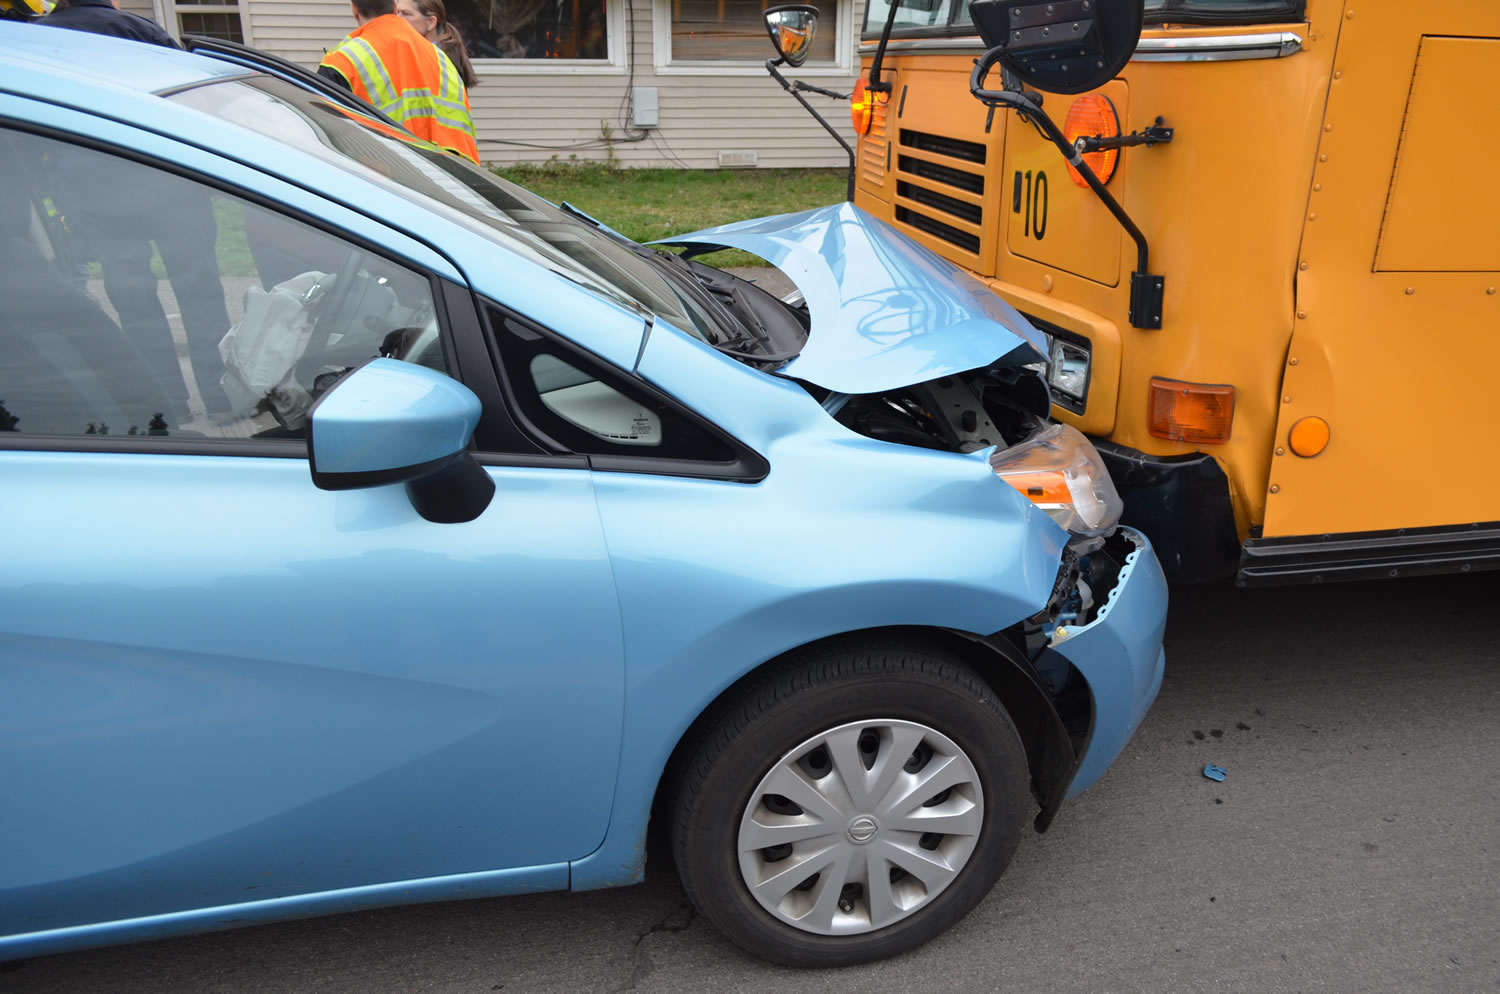 Vancouver police traffic detectives are investigating a head-on collision between a vehicle and a school bus that happened Wednesday morning. No children were seriously injured.